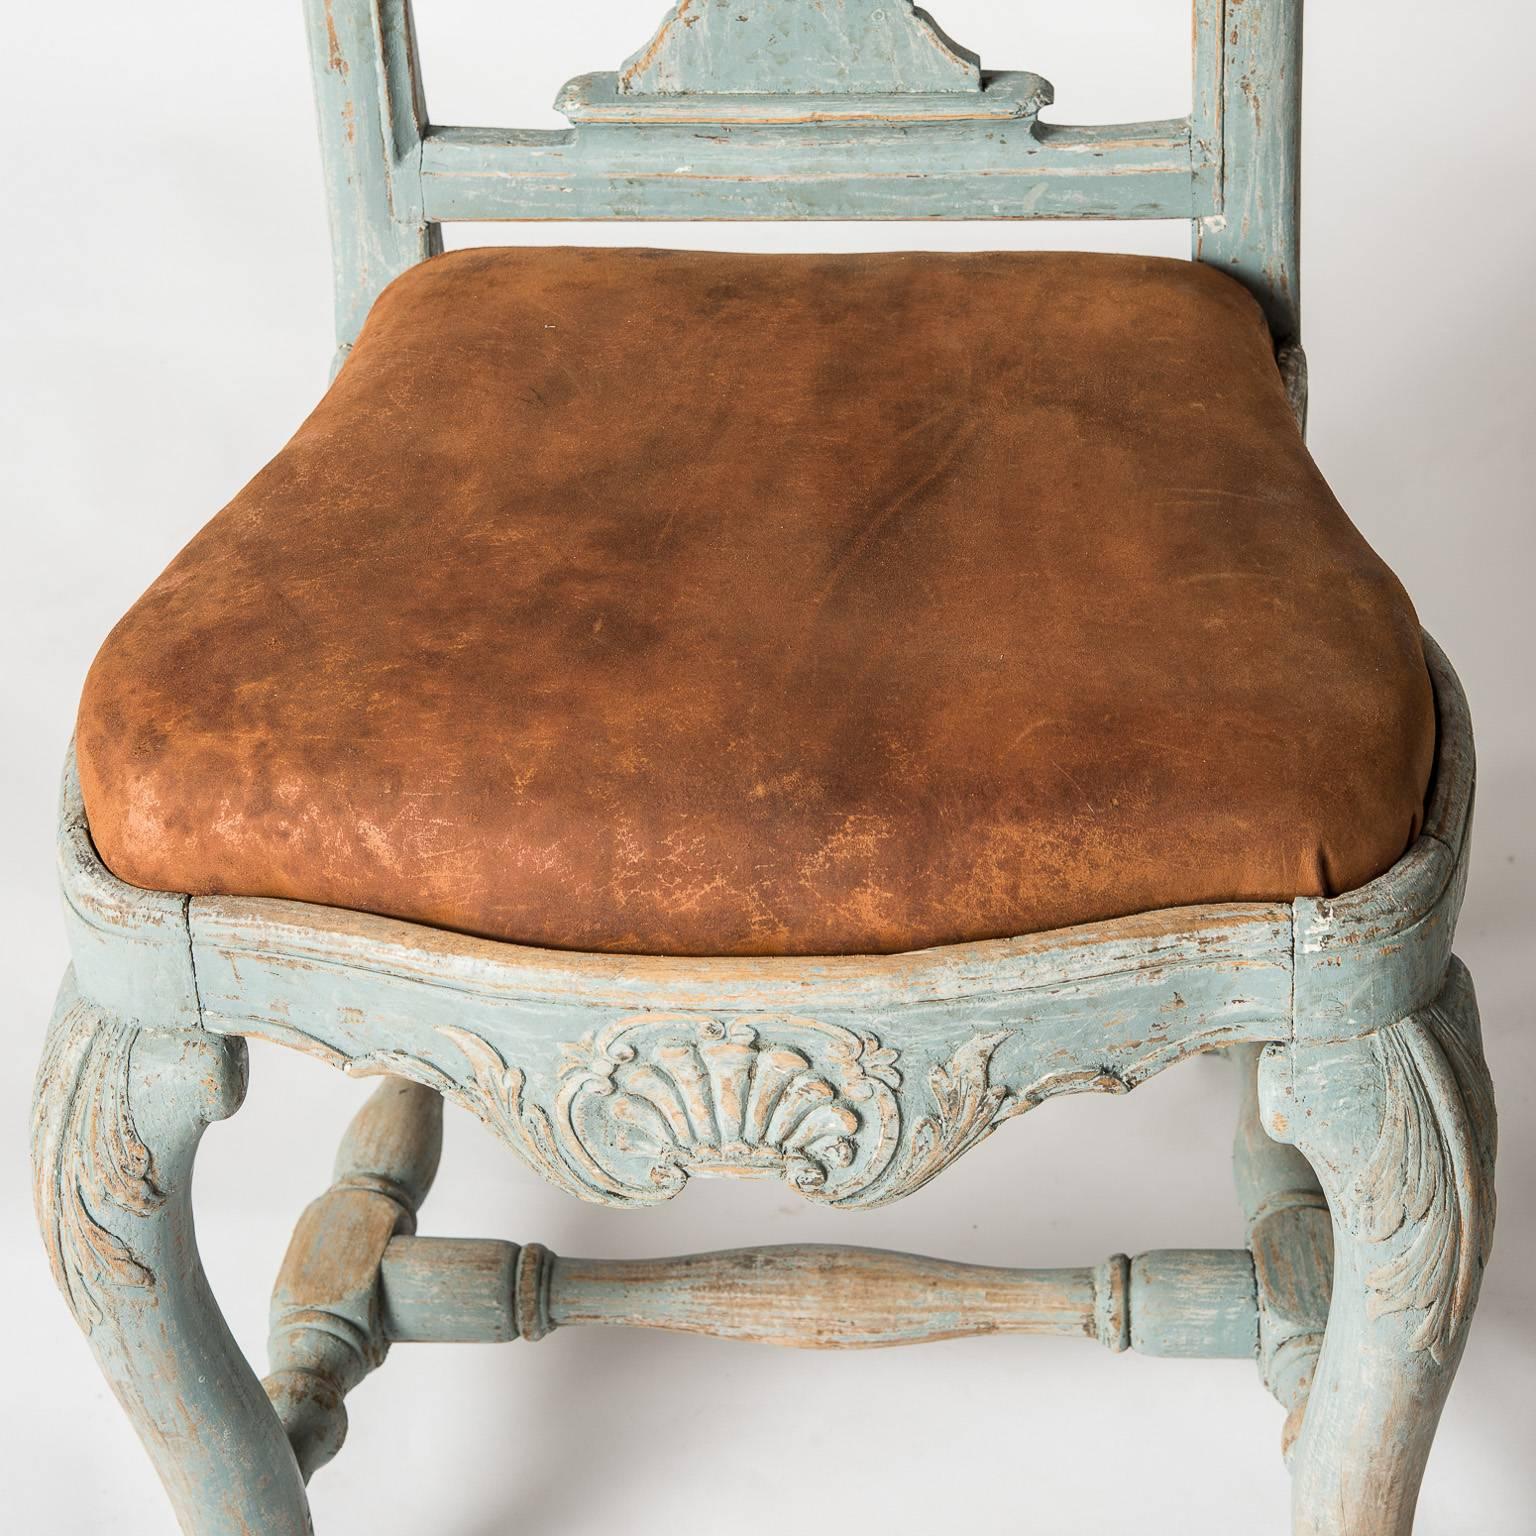 These rare chairs have great form with a fan shaped carving on the crest and old leather seats. The apron echoes the same fan shape as the crest and the legs have intricate carvings at the top and bottom, which is unusual. The old blue paint is a